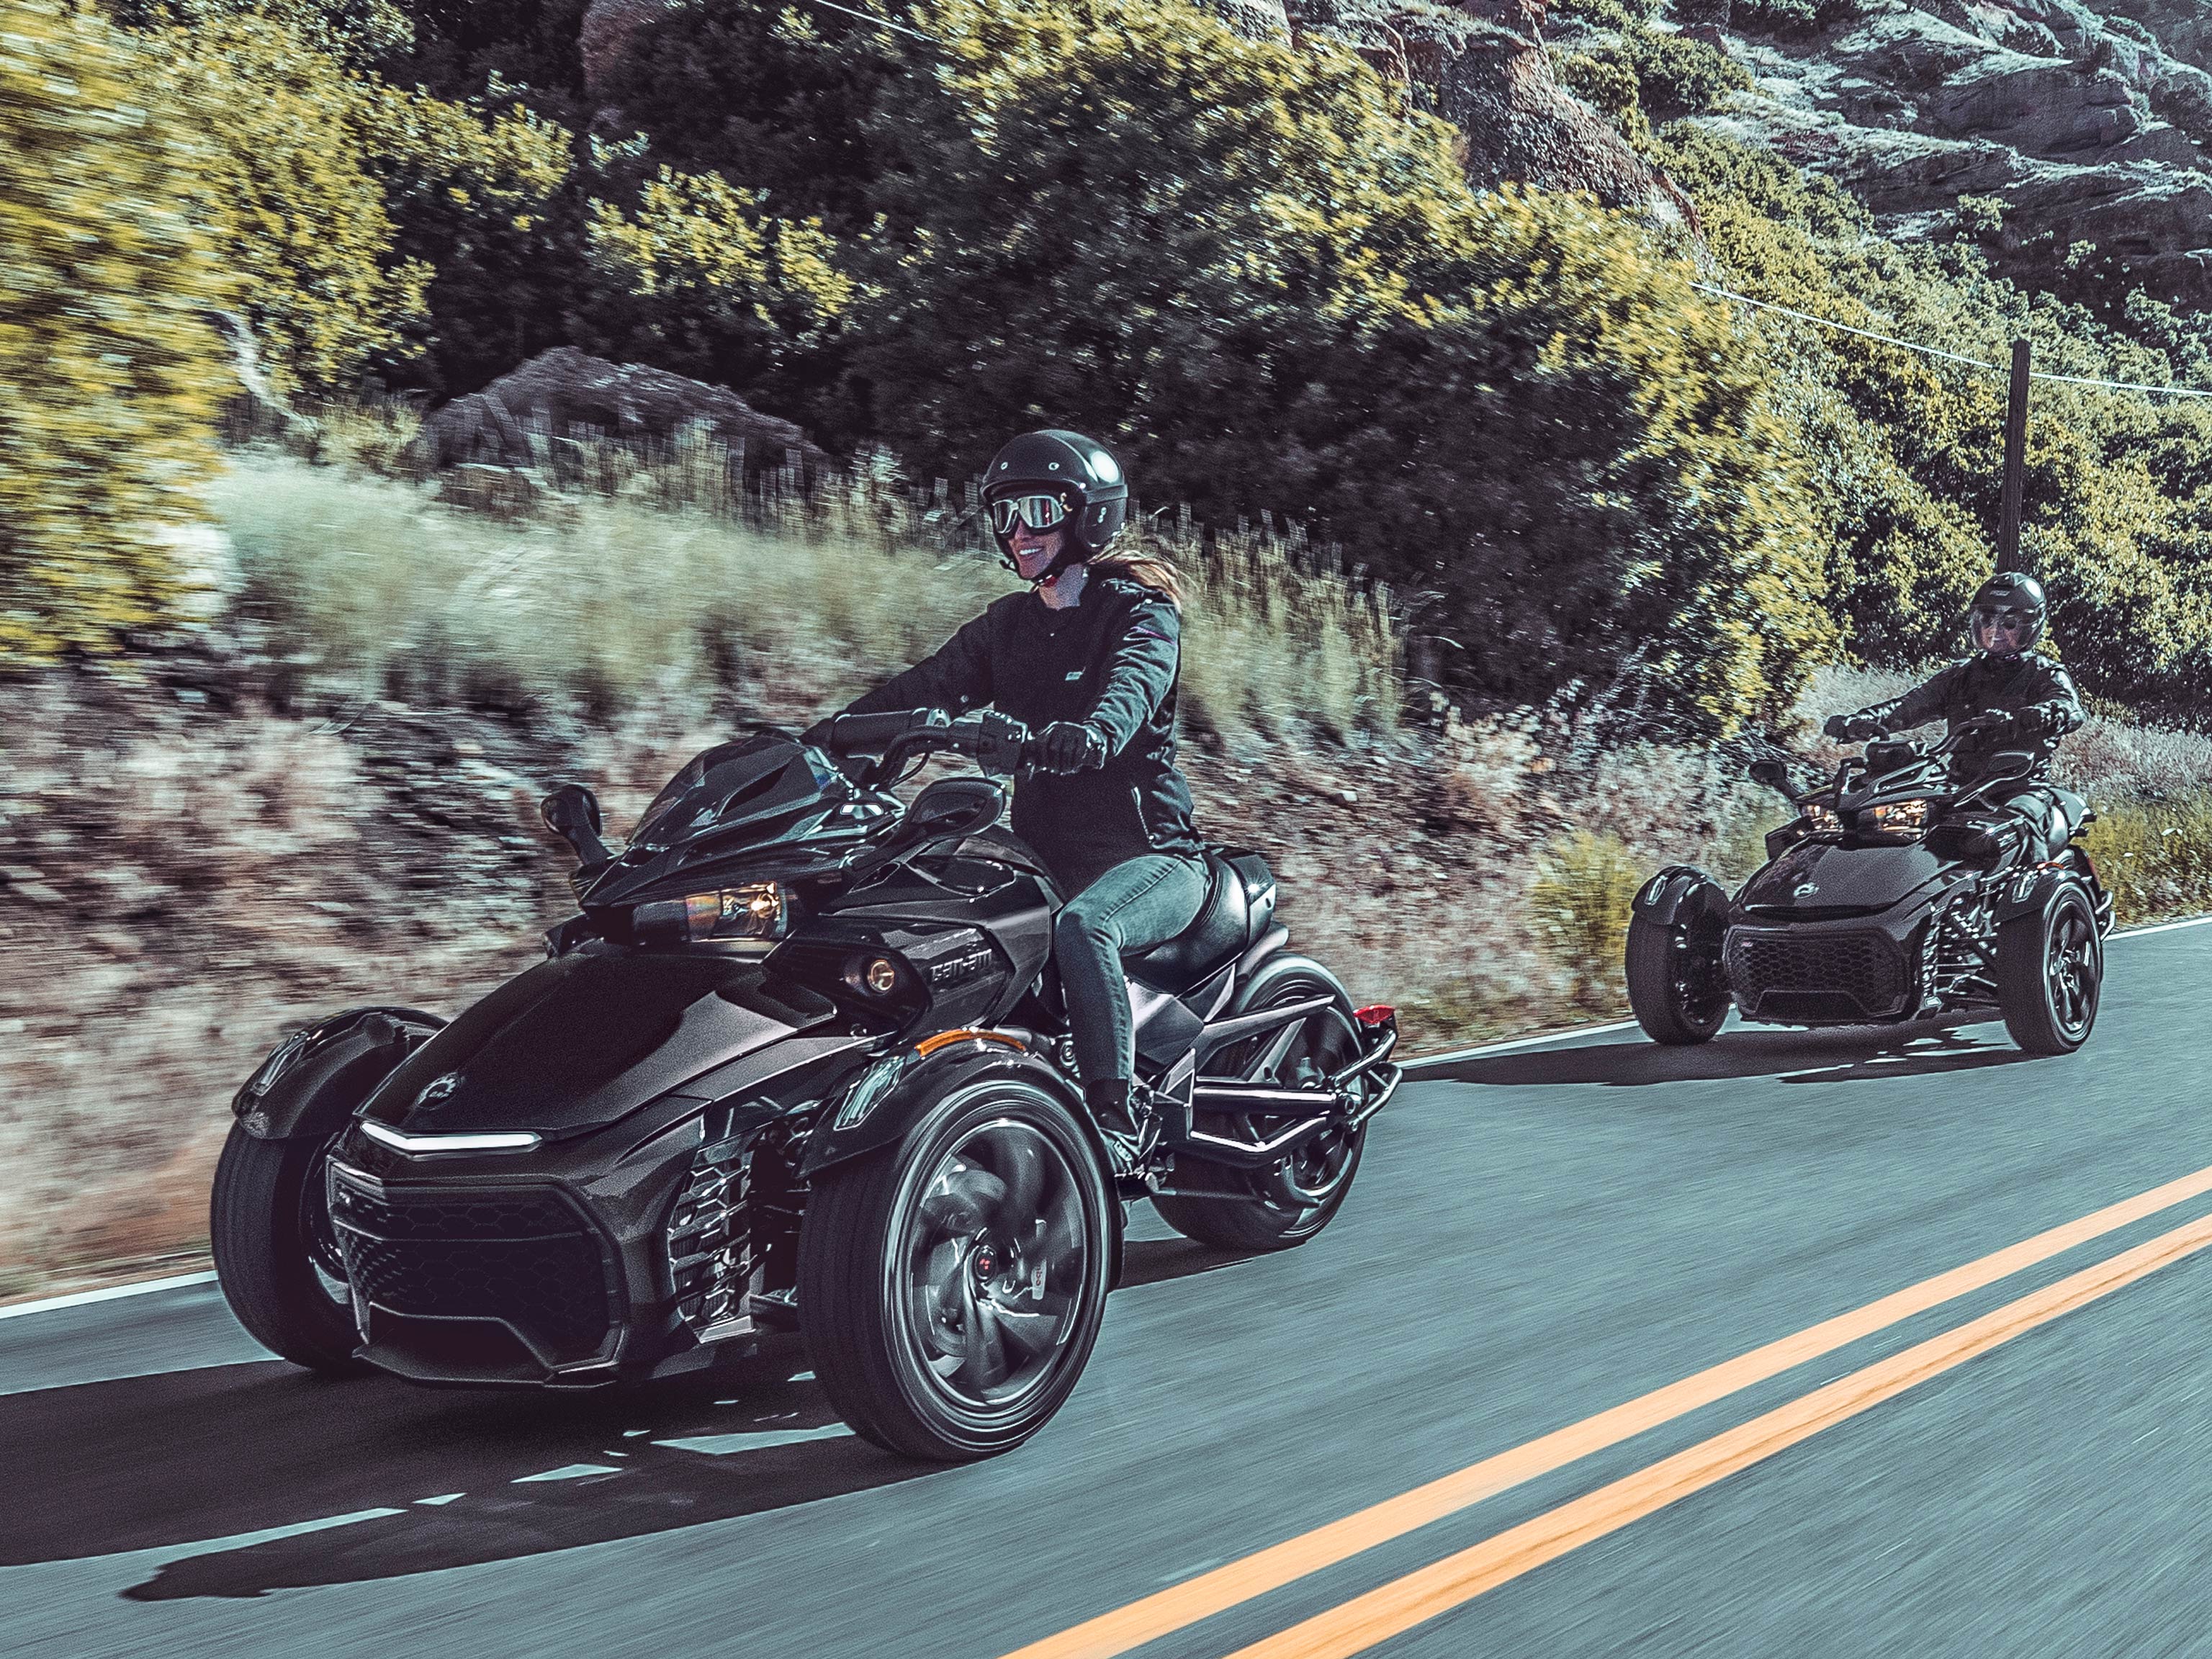 Two people riding Can-Am Spyder vehicles along an open desert road	